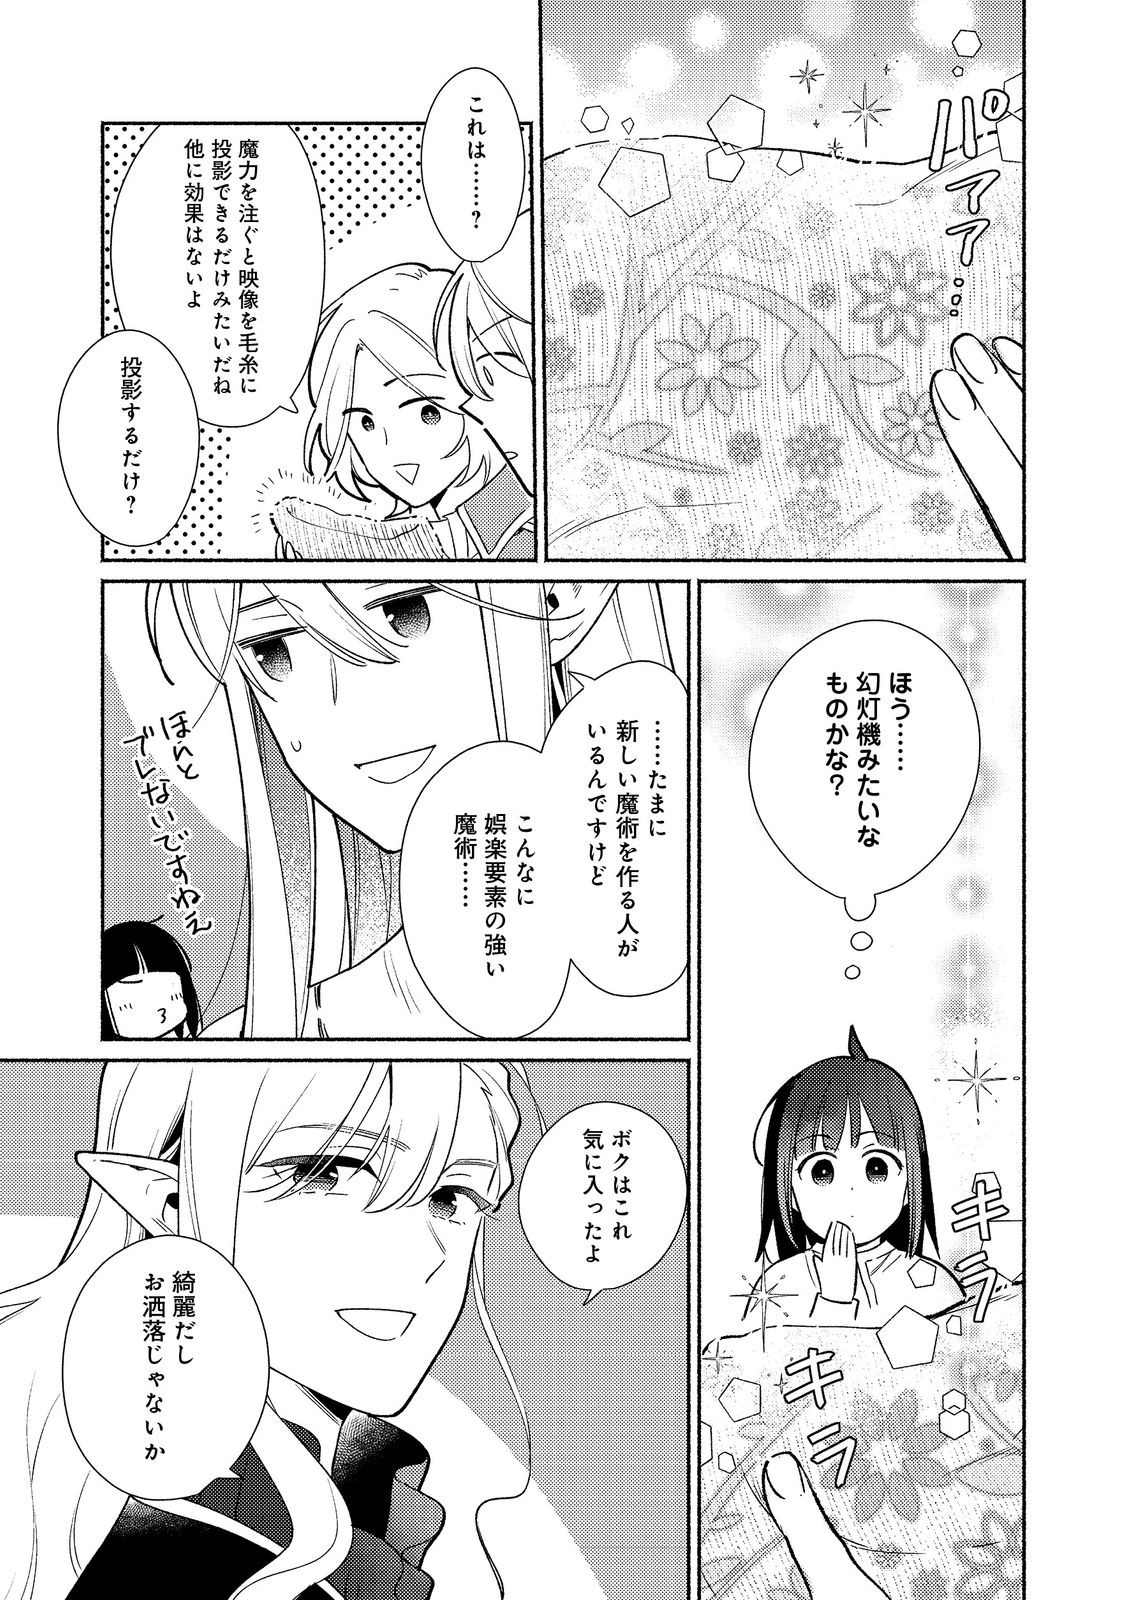 I’m the White Pig Nobleman 第23.1話 - Page 15